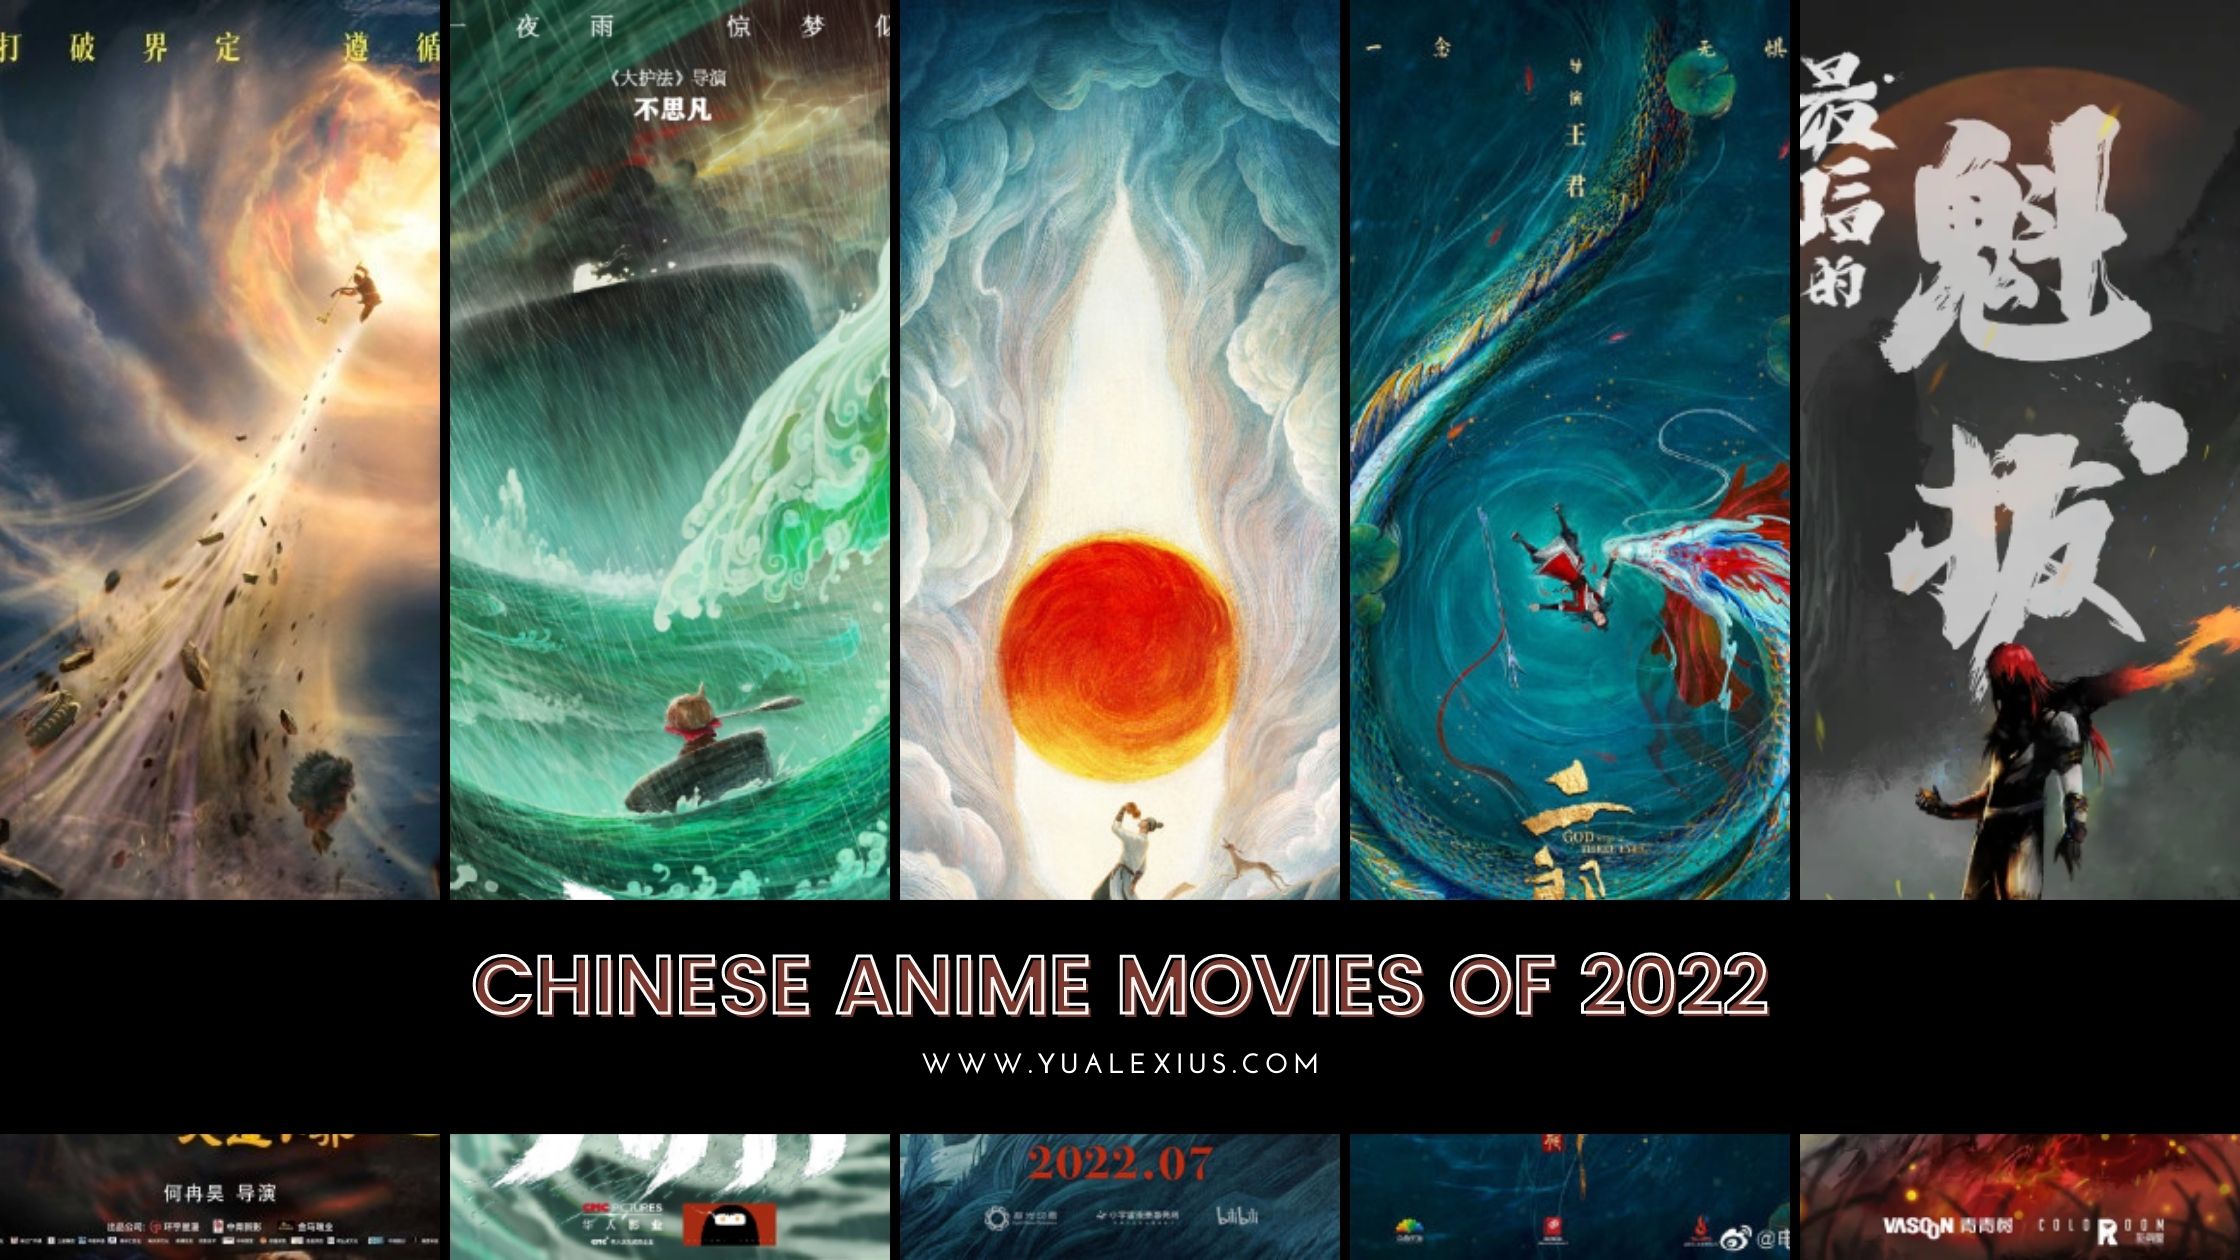 12 Chinese Anime Movies Releasing In 2022 That Donghua Fans Should Watch |  Yu Alexius